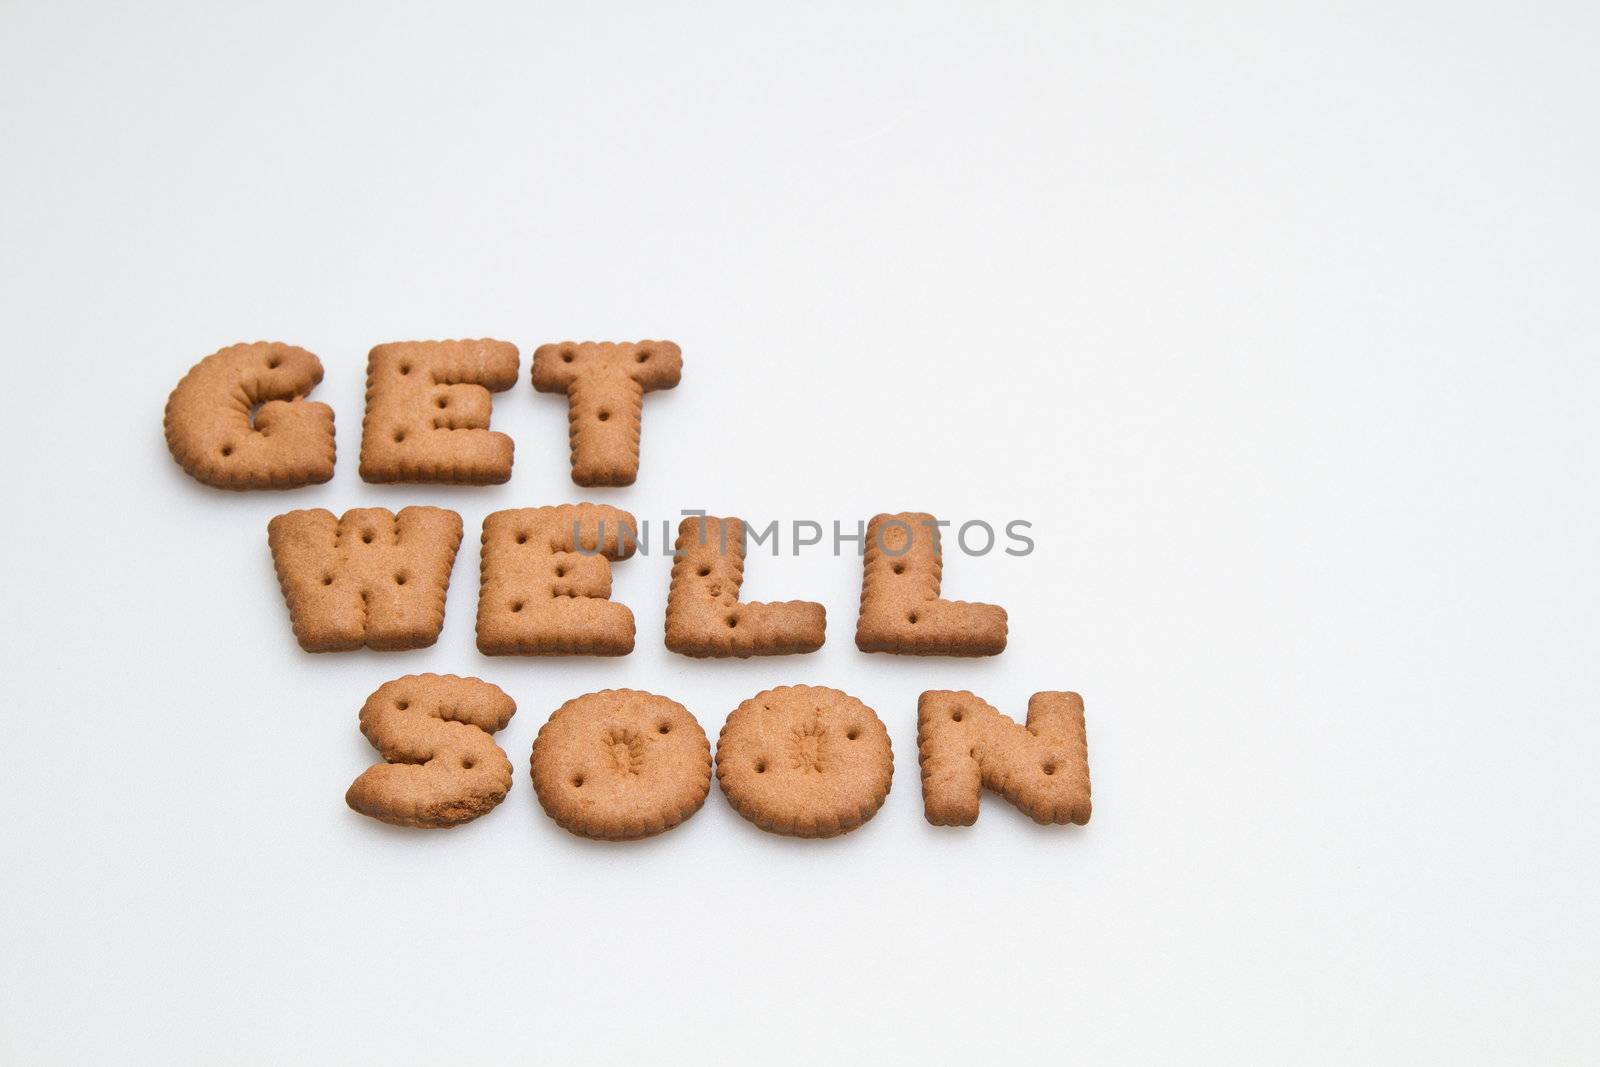 Get well soon wording made by brown biscuits on white surface landscape orientation